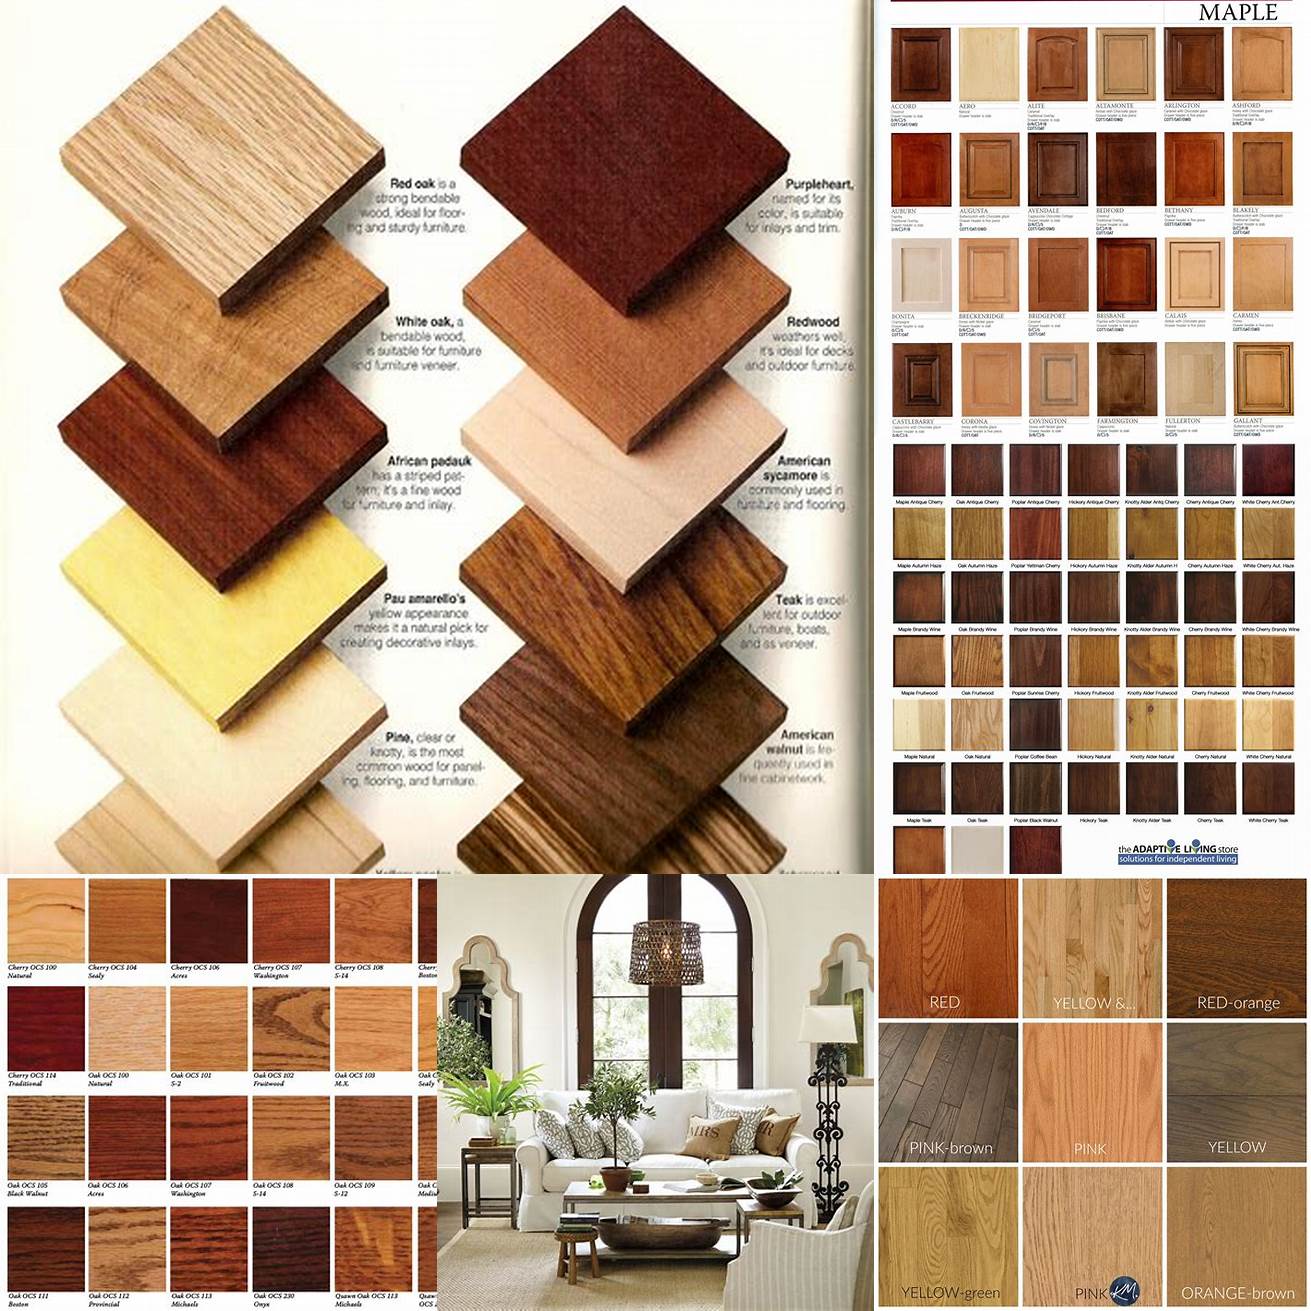 A Photo of Different Finishes